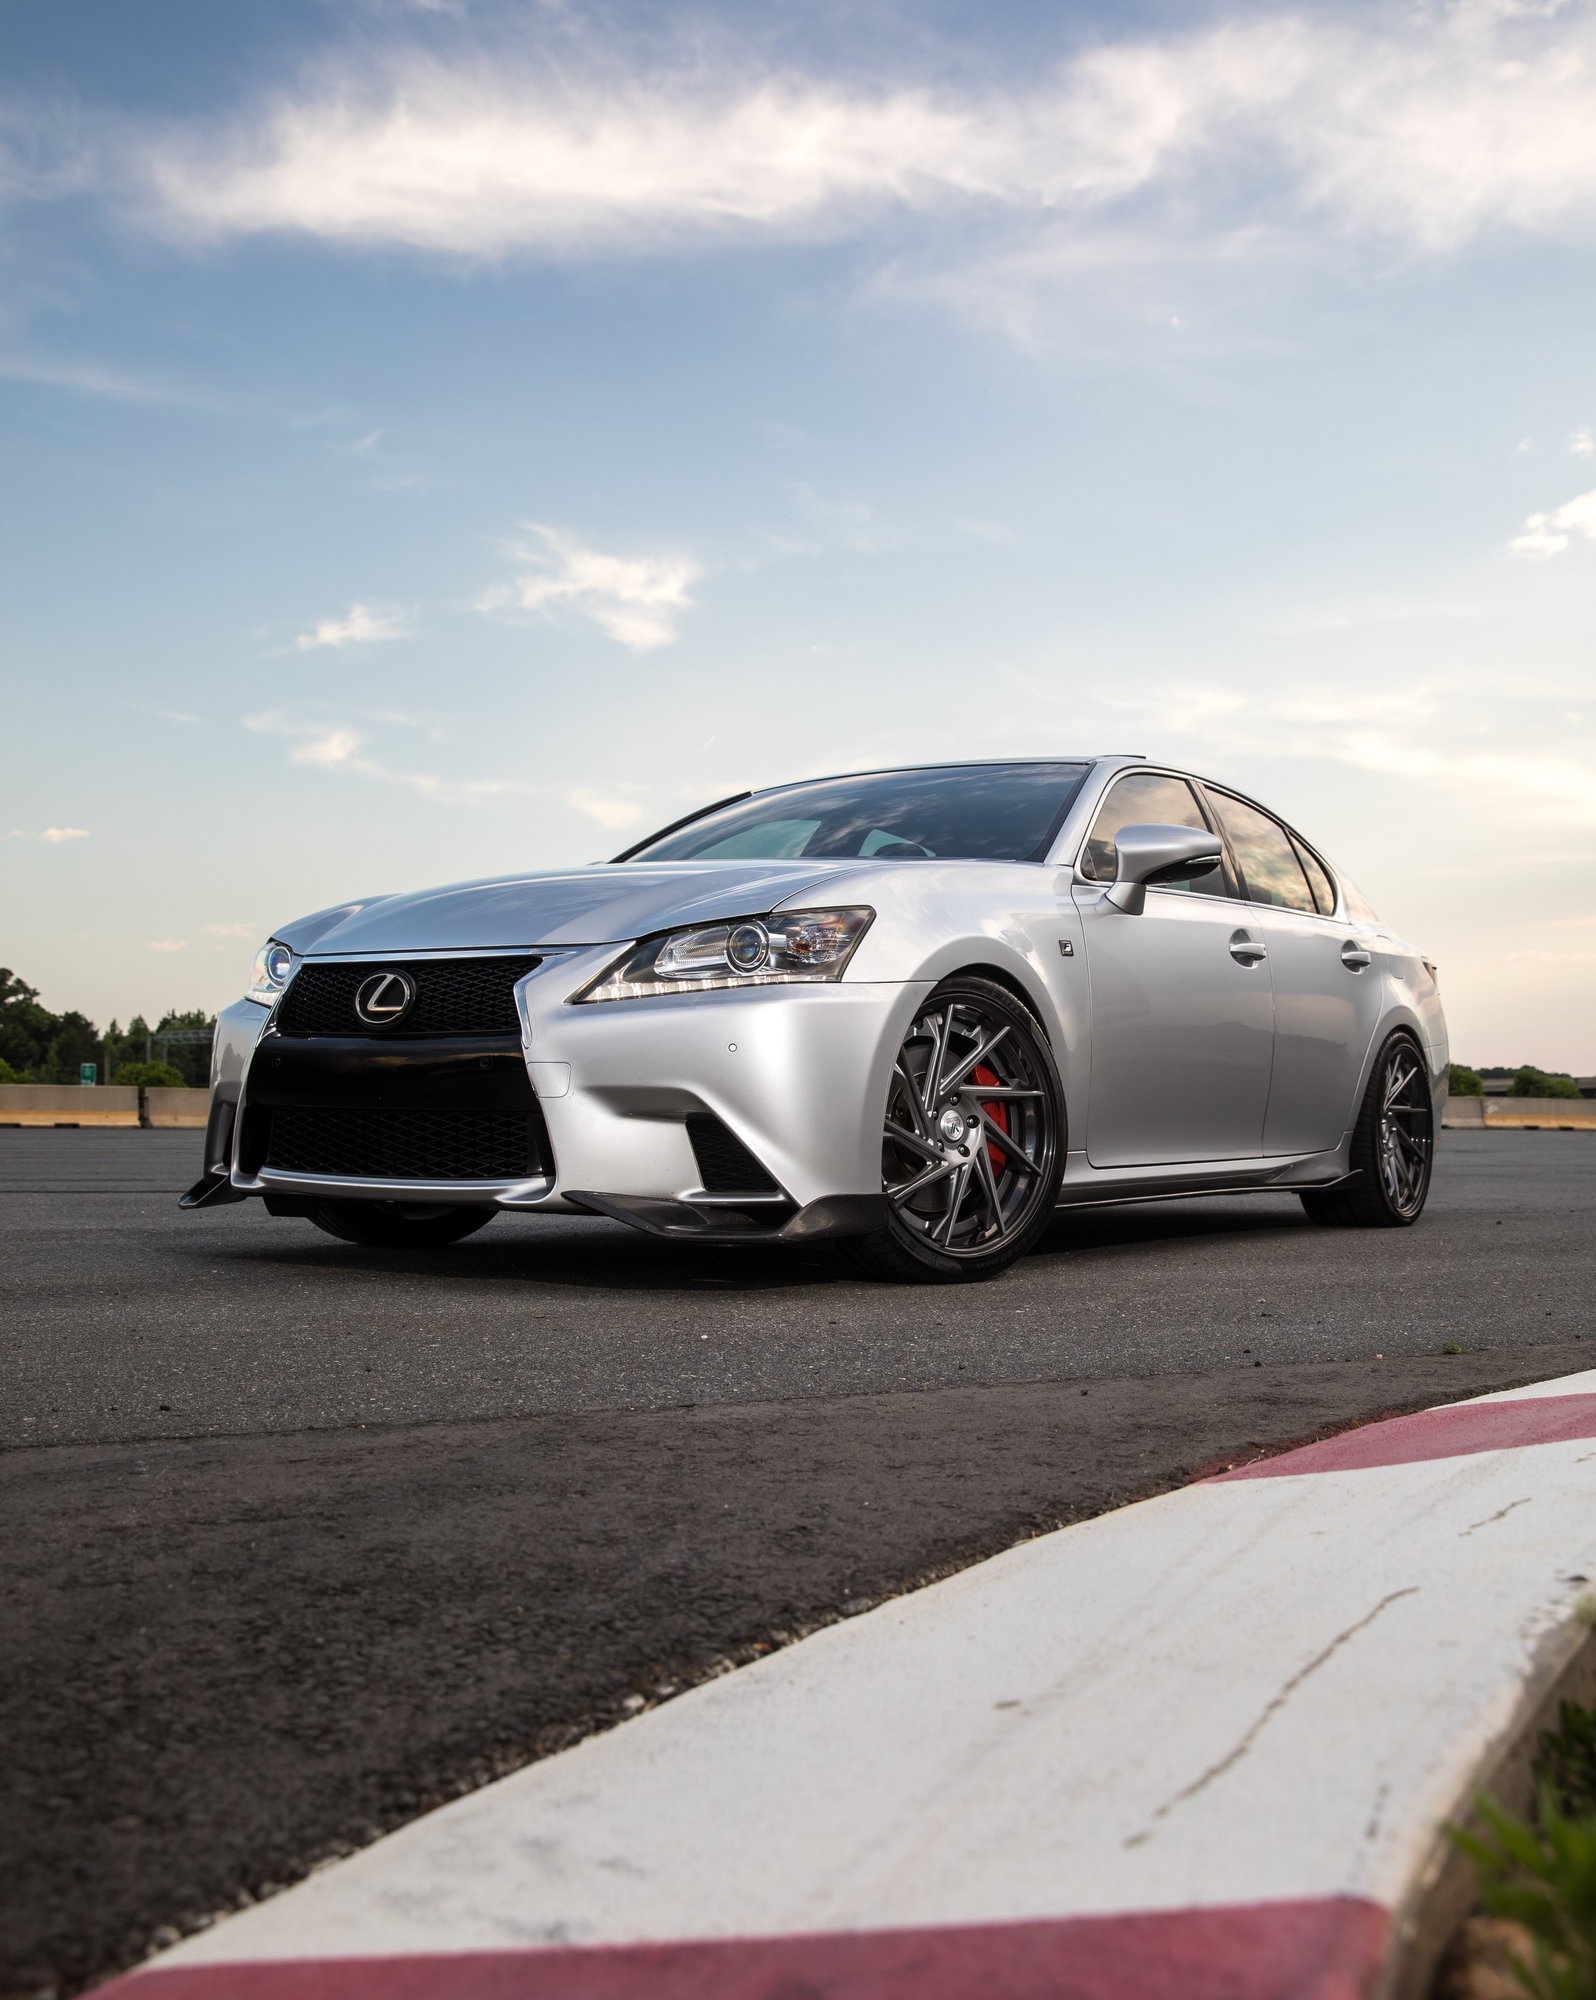 2014 Lexus GS350 - For sale: 2014 Lexus GS350 F Sport with $10k worth of mods - Used - VIN JTHBE1BL7E5043718 - 91,000 Miles - 6 cyl - 2WD - Automatic - Sedan - Silver - Charlotte, NC 28277, United States